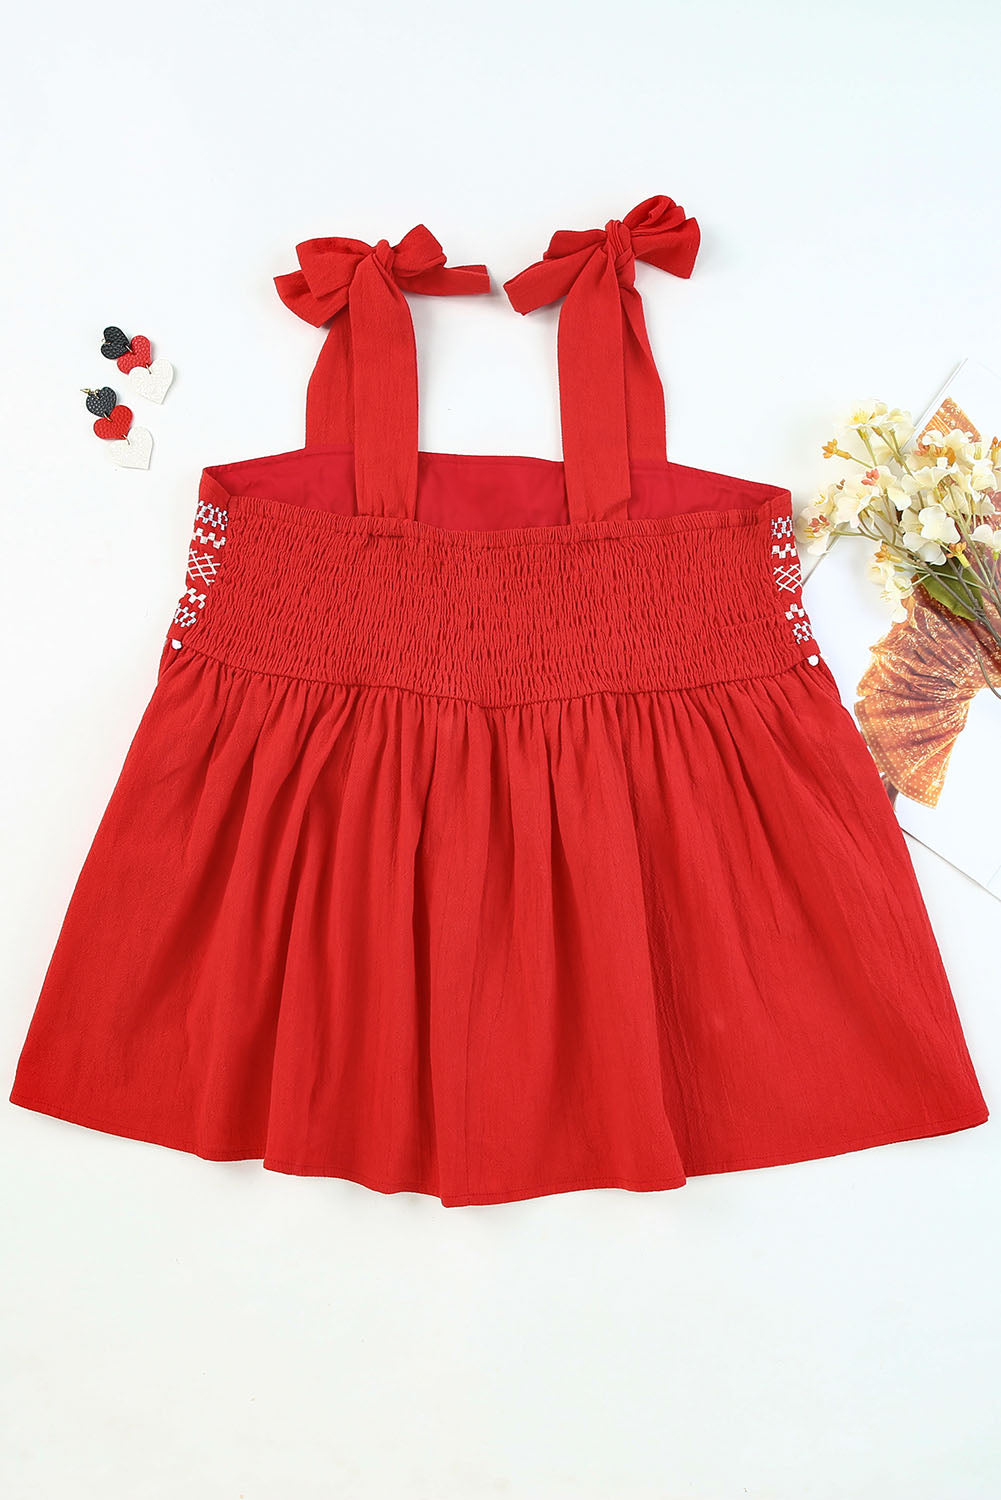 Red top featuring adjustable tie straps and embroidery.